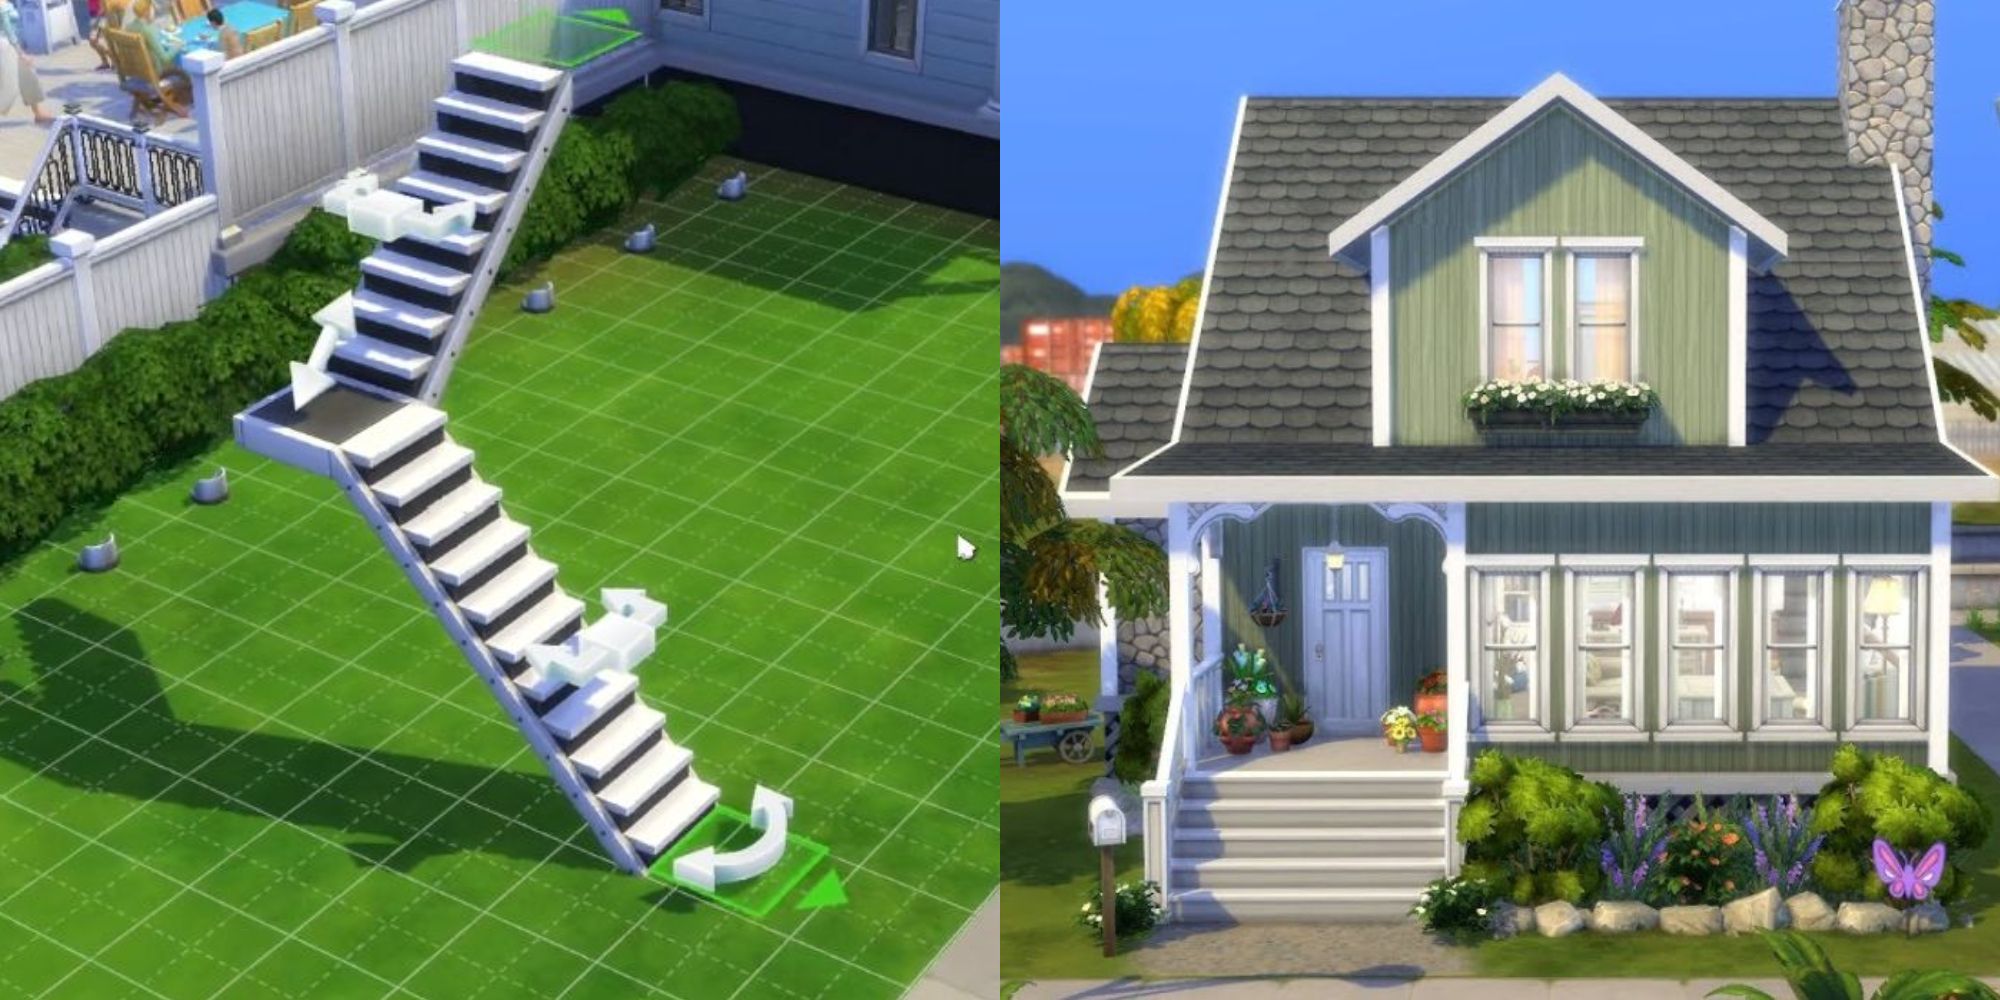 The Sims 4 10 Tips And Tricks To Improve Your Builds